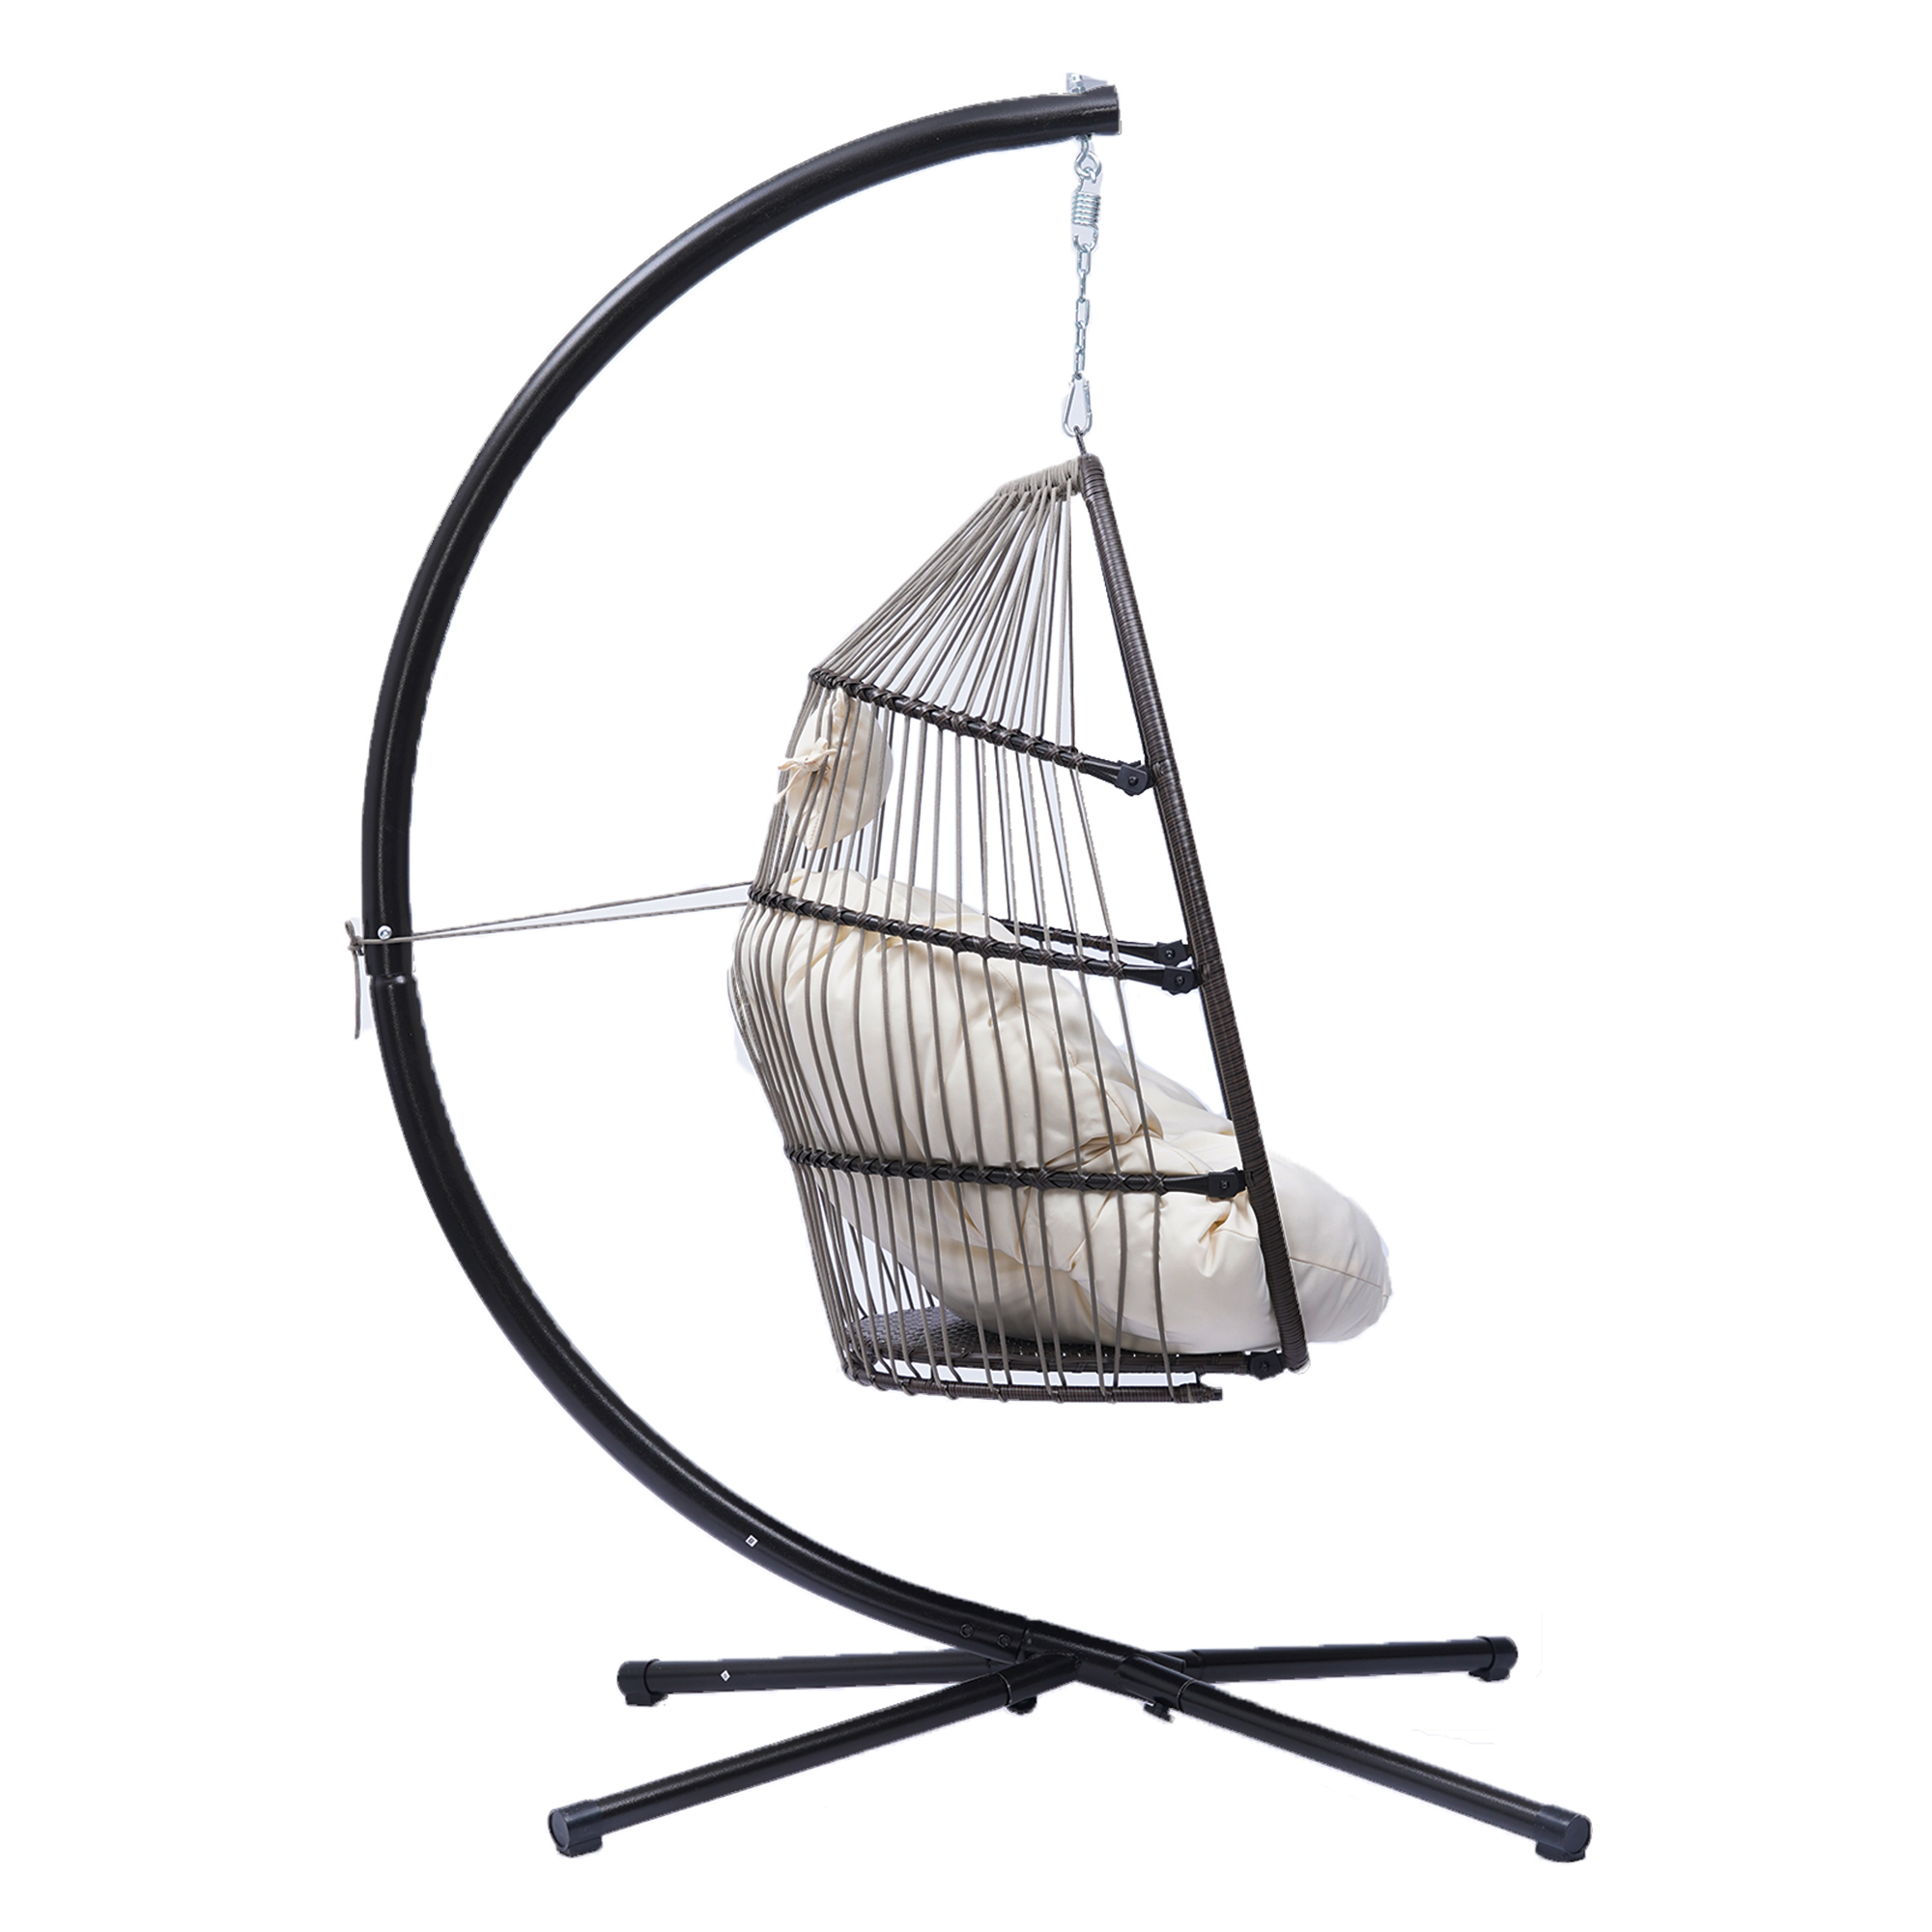 Outdoor Yard Folding Hanging Chair Egg Chair with Stand Indoor Outdoor Balcony Bedroom Basket Hanging Lounge Chair - image 2 of 9